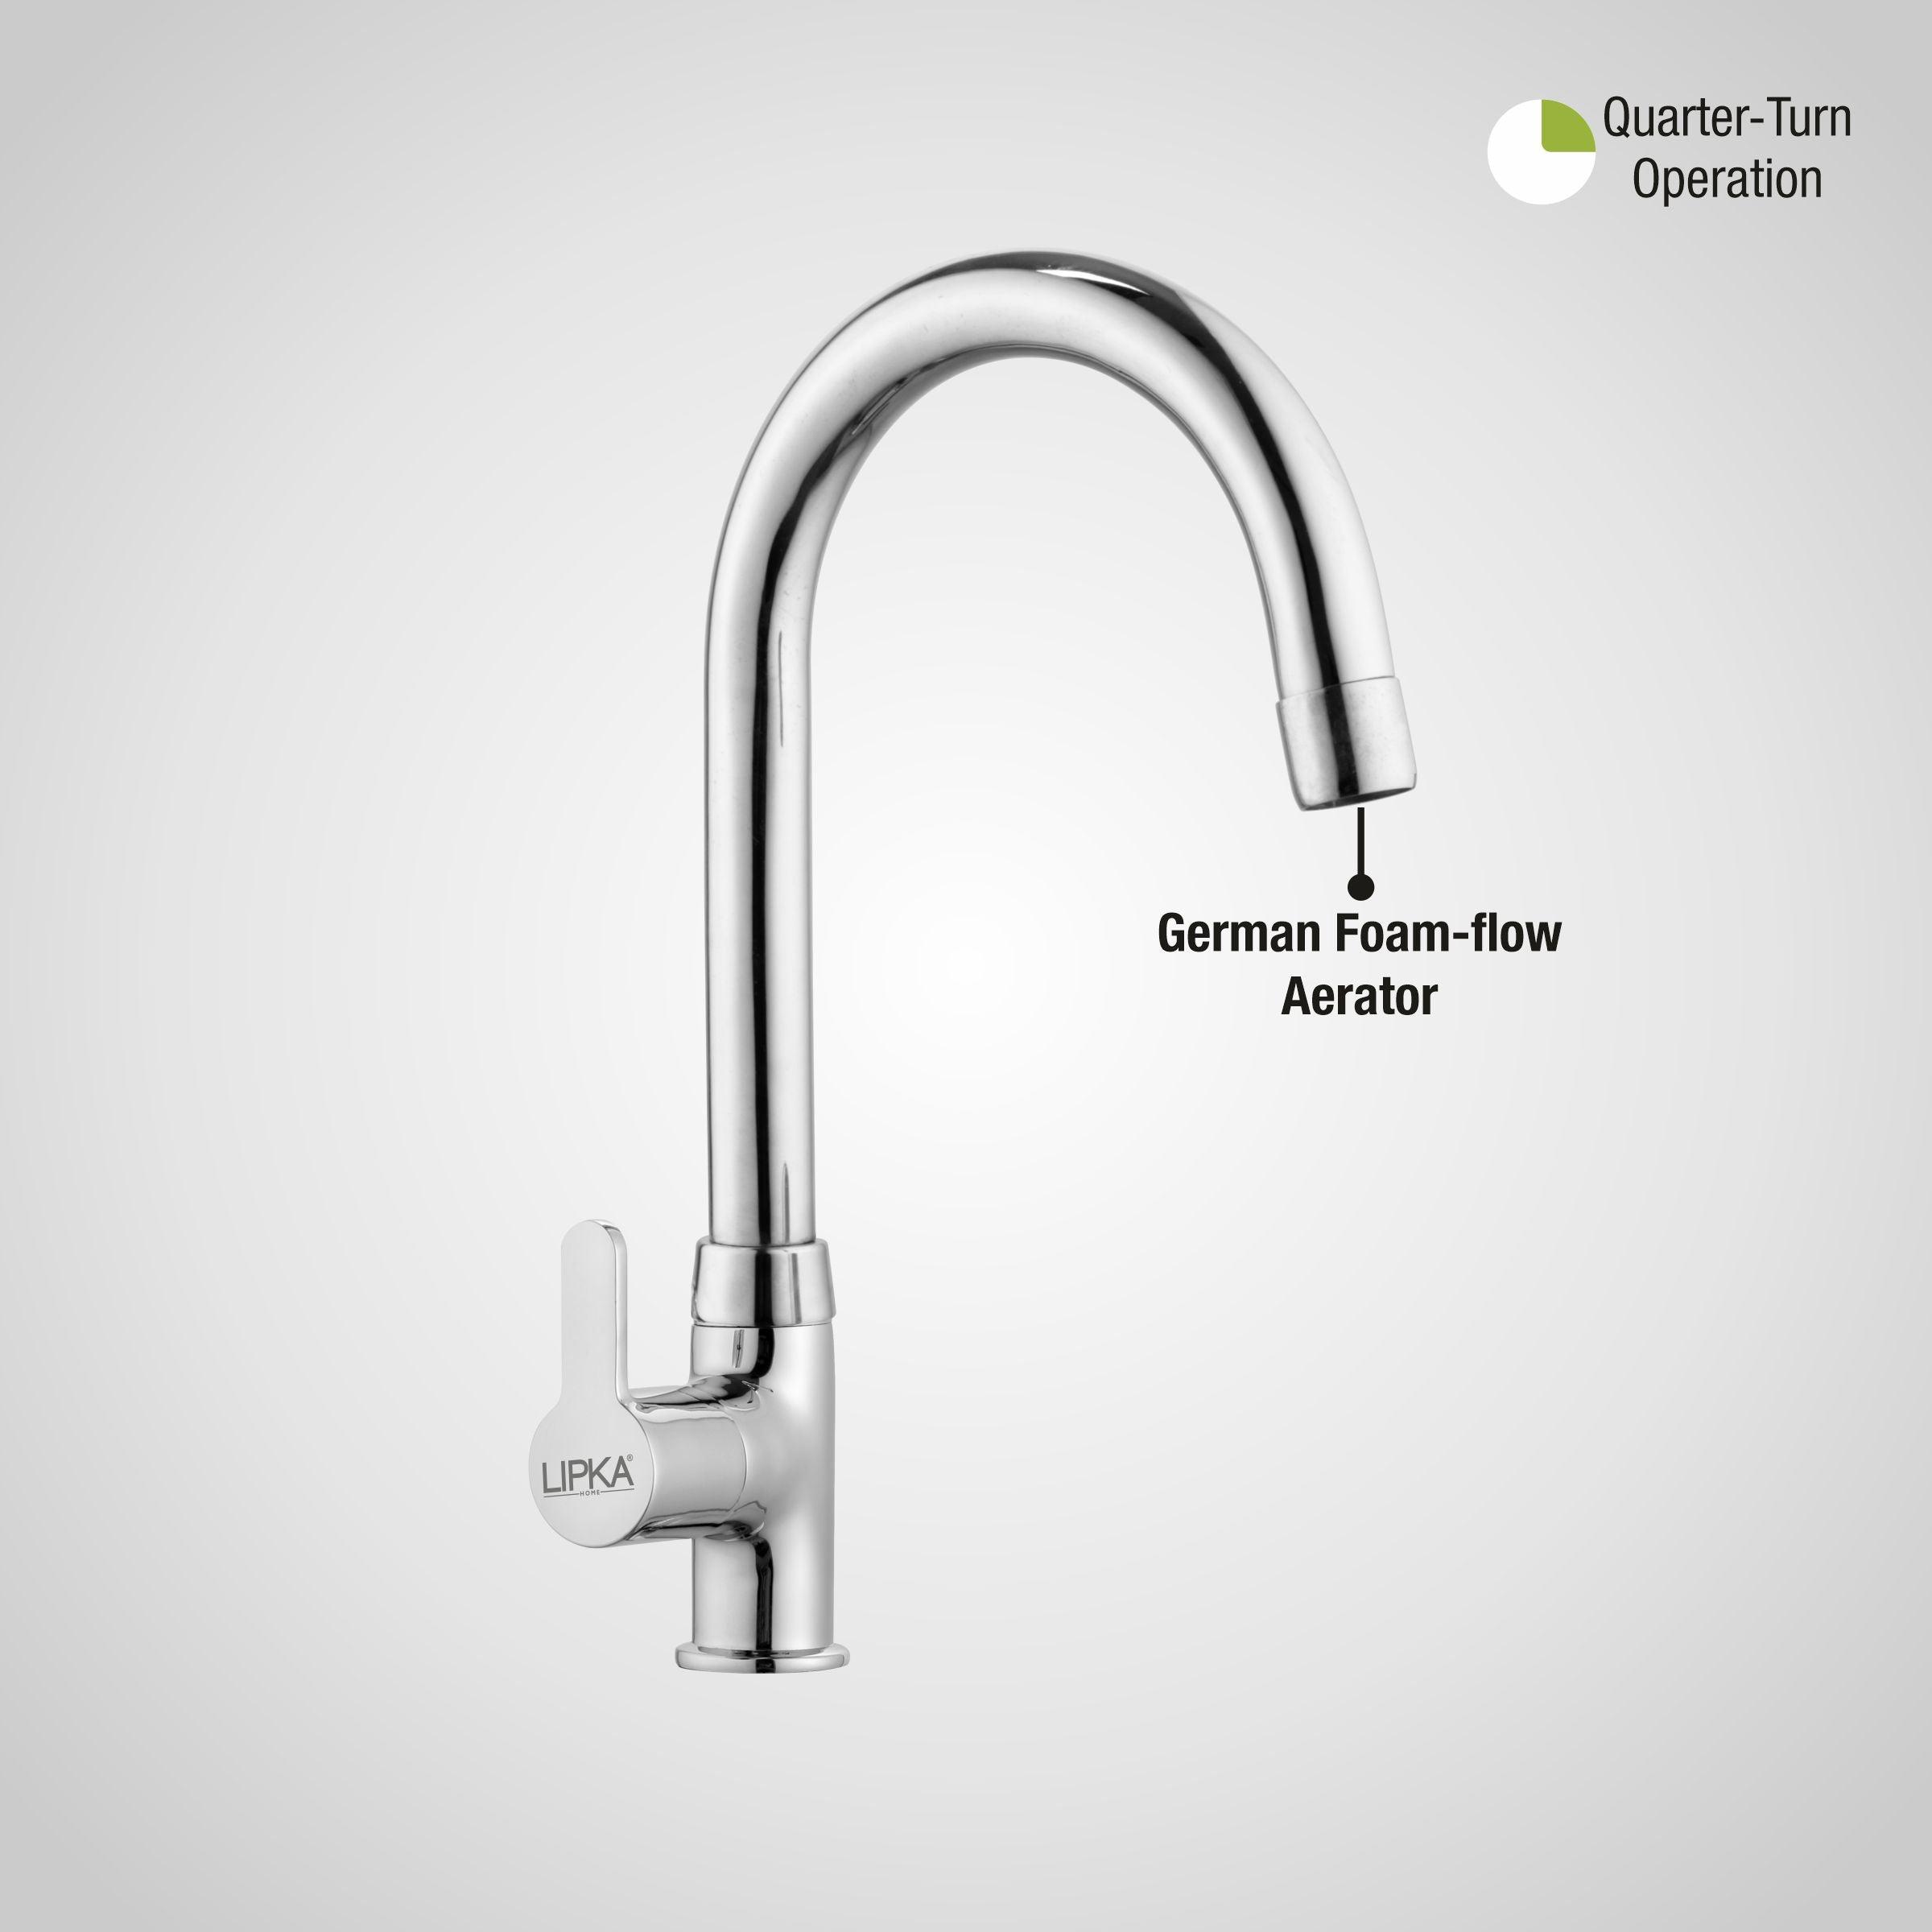 Fusion Swan Neck Brass Faucet with Round Swivel Spout (15 Inches) - LIPKA - Lipka Home